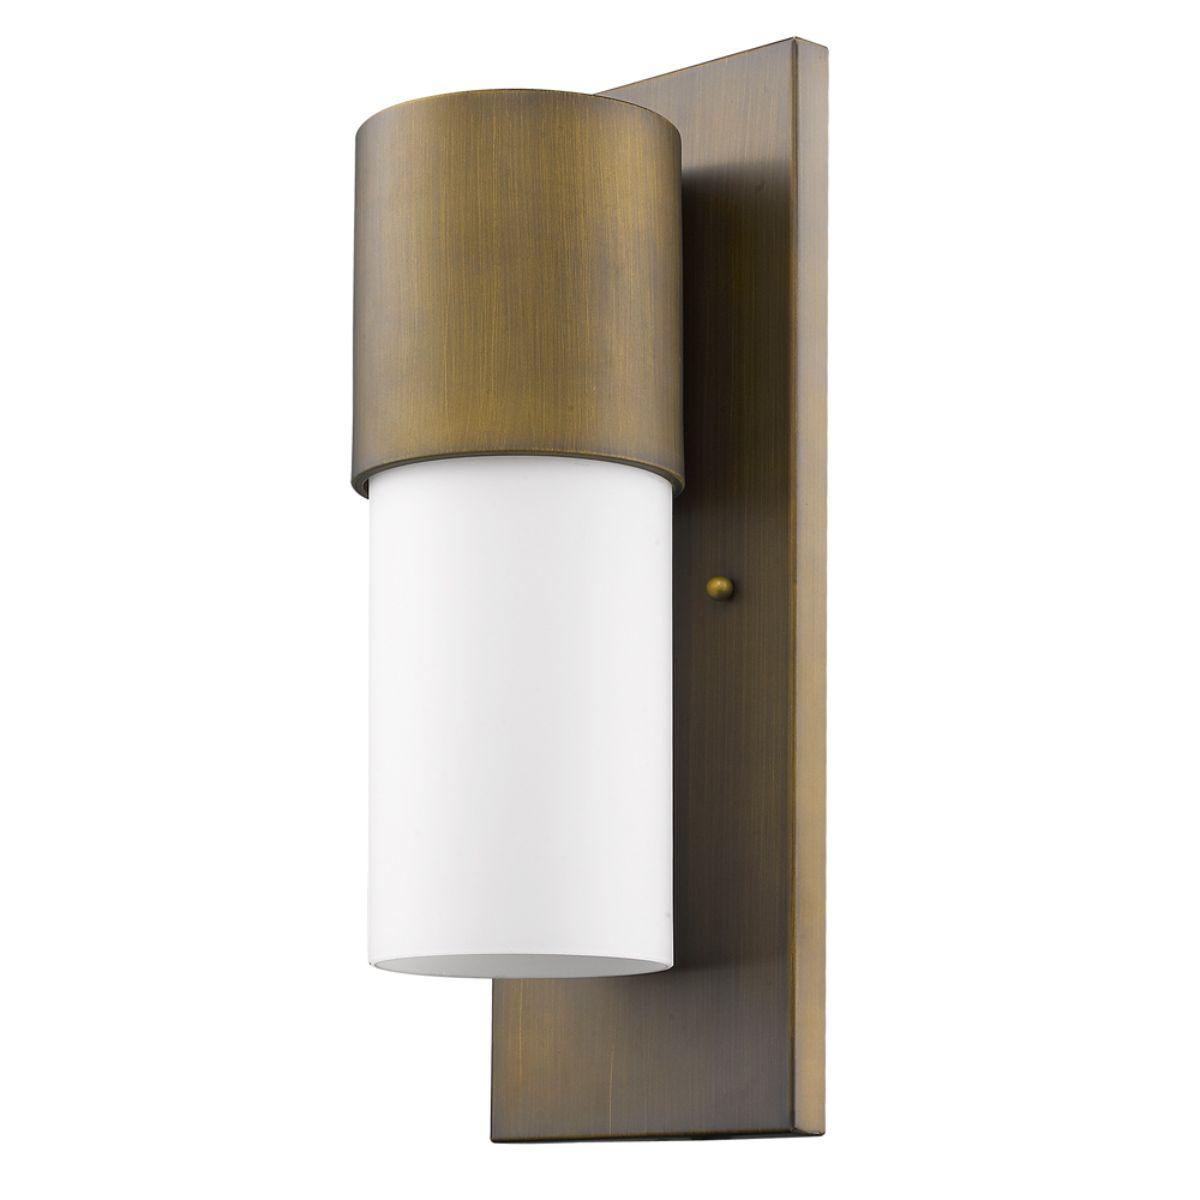 Cooper 16 In. Outdoor Wall Sconce